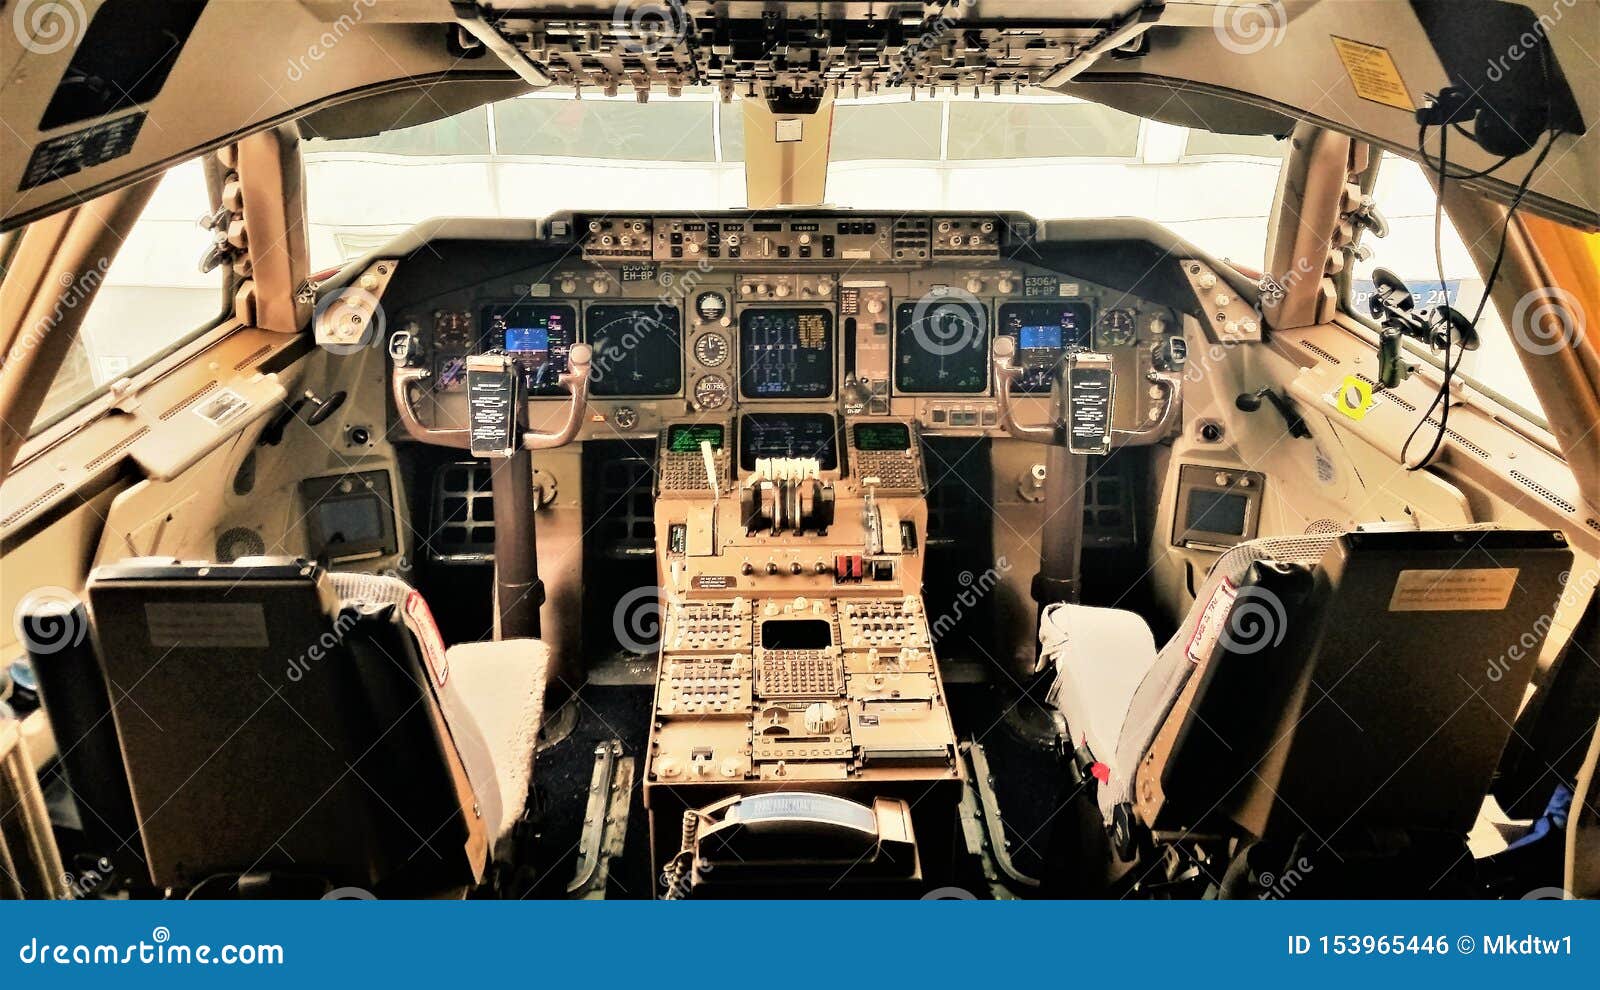 747-400 Cockpit Boeing Aircraft Delta Airlines Editorial Photo - Image ...